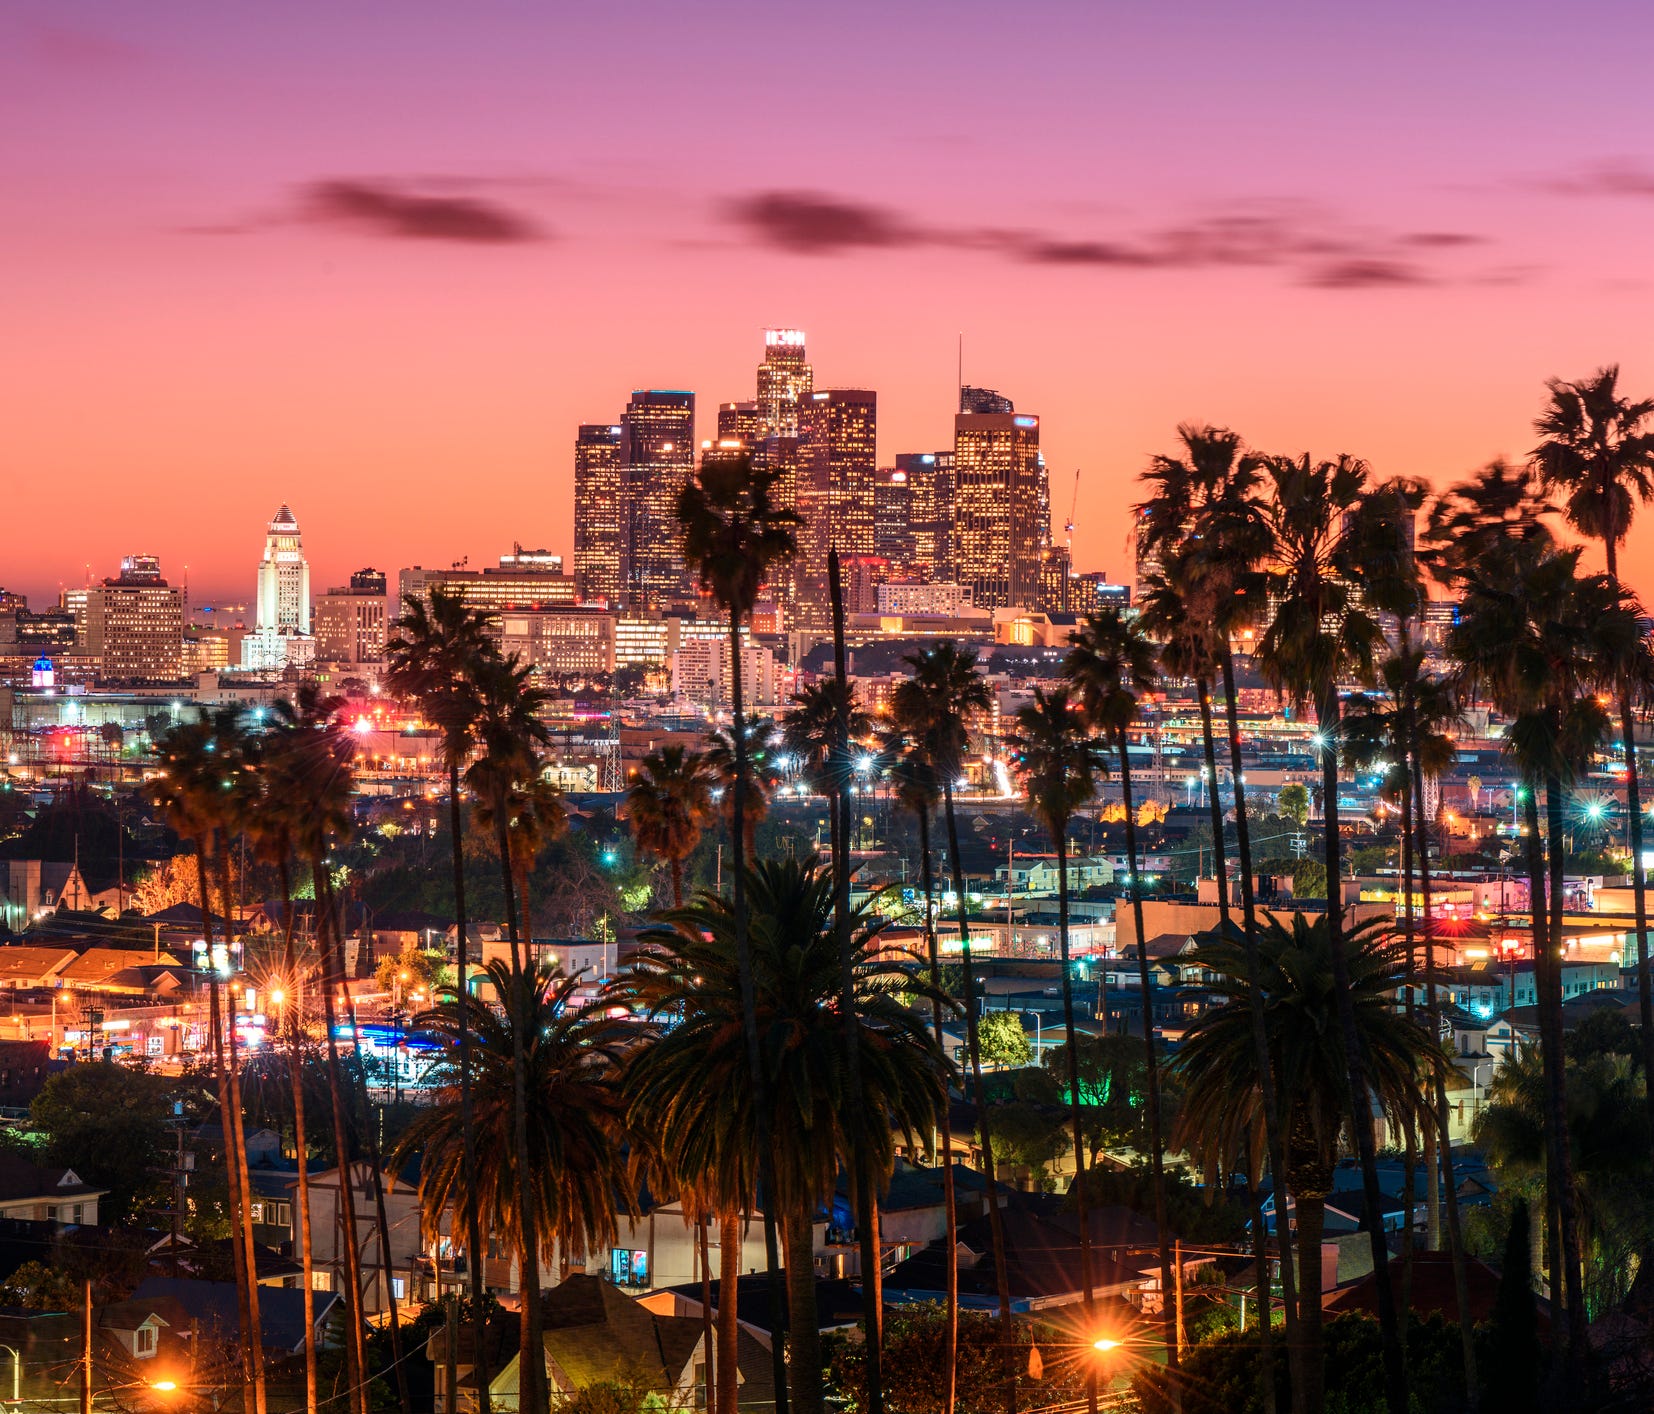 Downtown Los Angeles: Head to downtown Los Angeles as a home base for an L.A. spring break vacation. With access to Santa Monica via the Expo Line, you'll save on accommodations here. Downtown Los Angeles is still up-and-coming, with plenty of hotel,